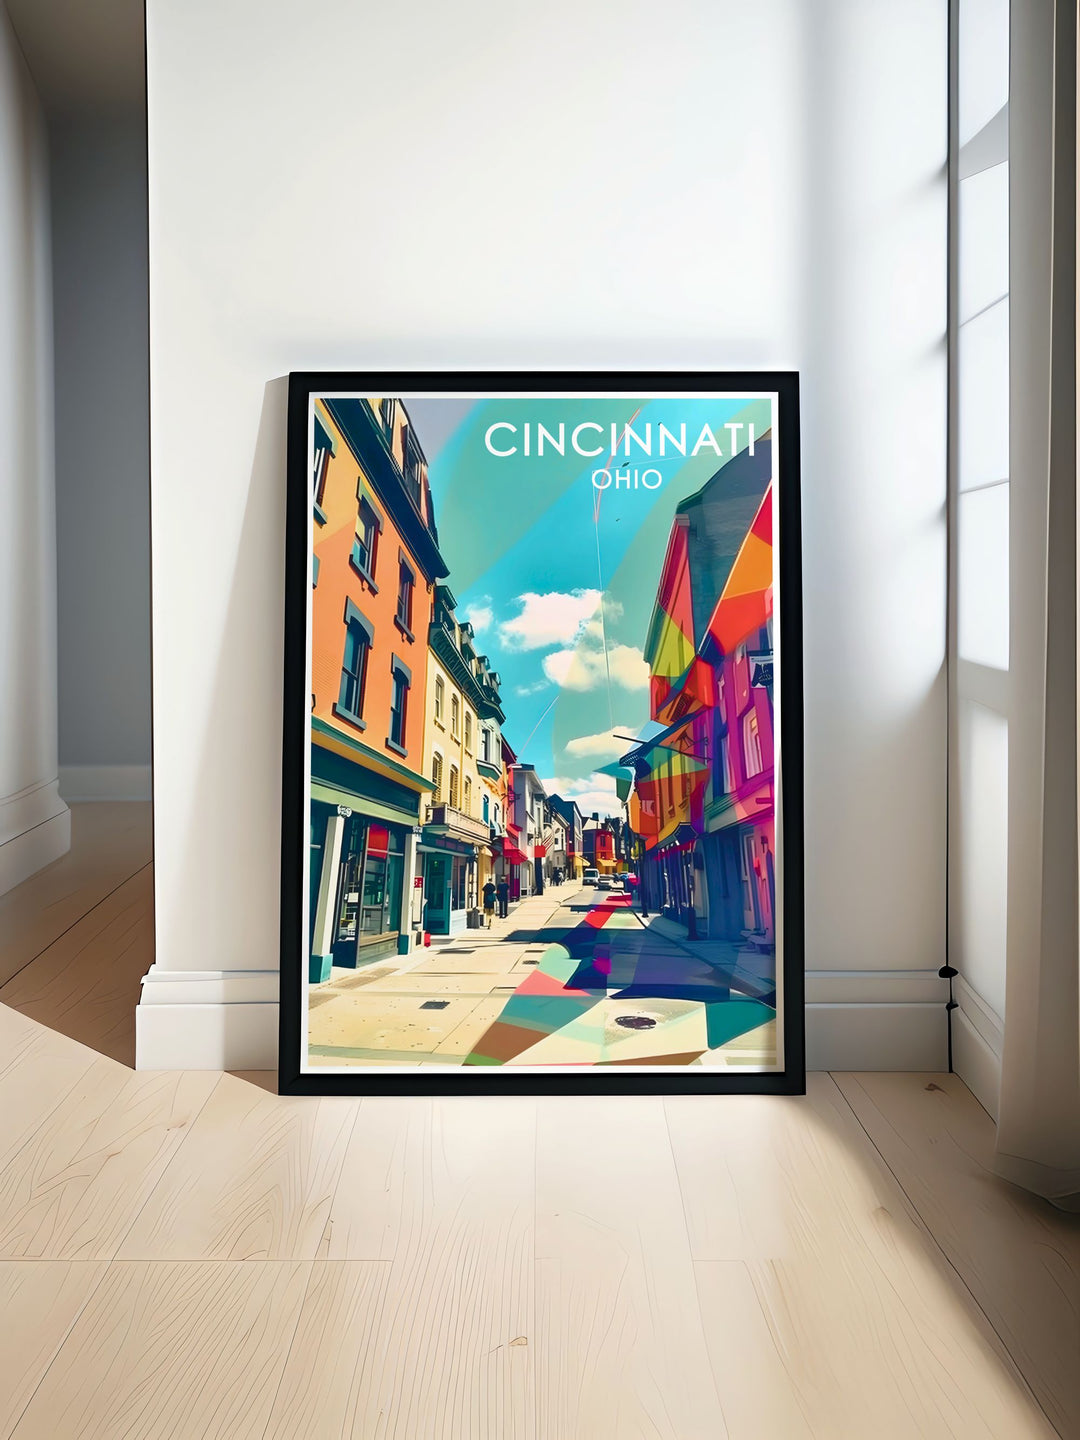 Add a piece of Cincinnatis cultural heritage to your home with this stunning travel poster of Findlay Market. The markets vibrant stalls and community spirit make it a captivating focal point.